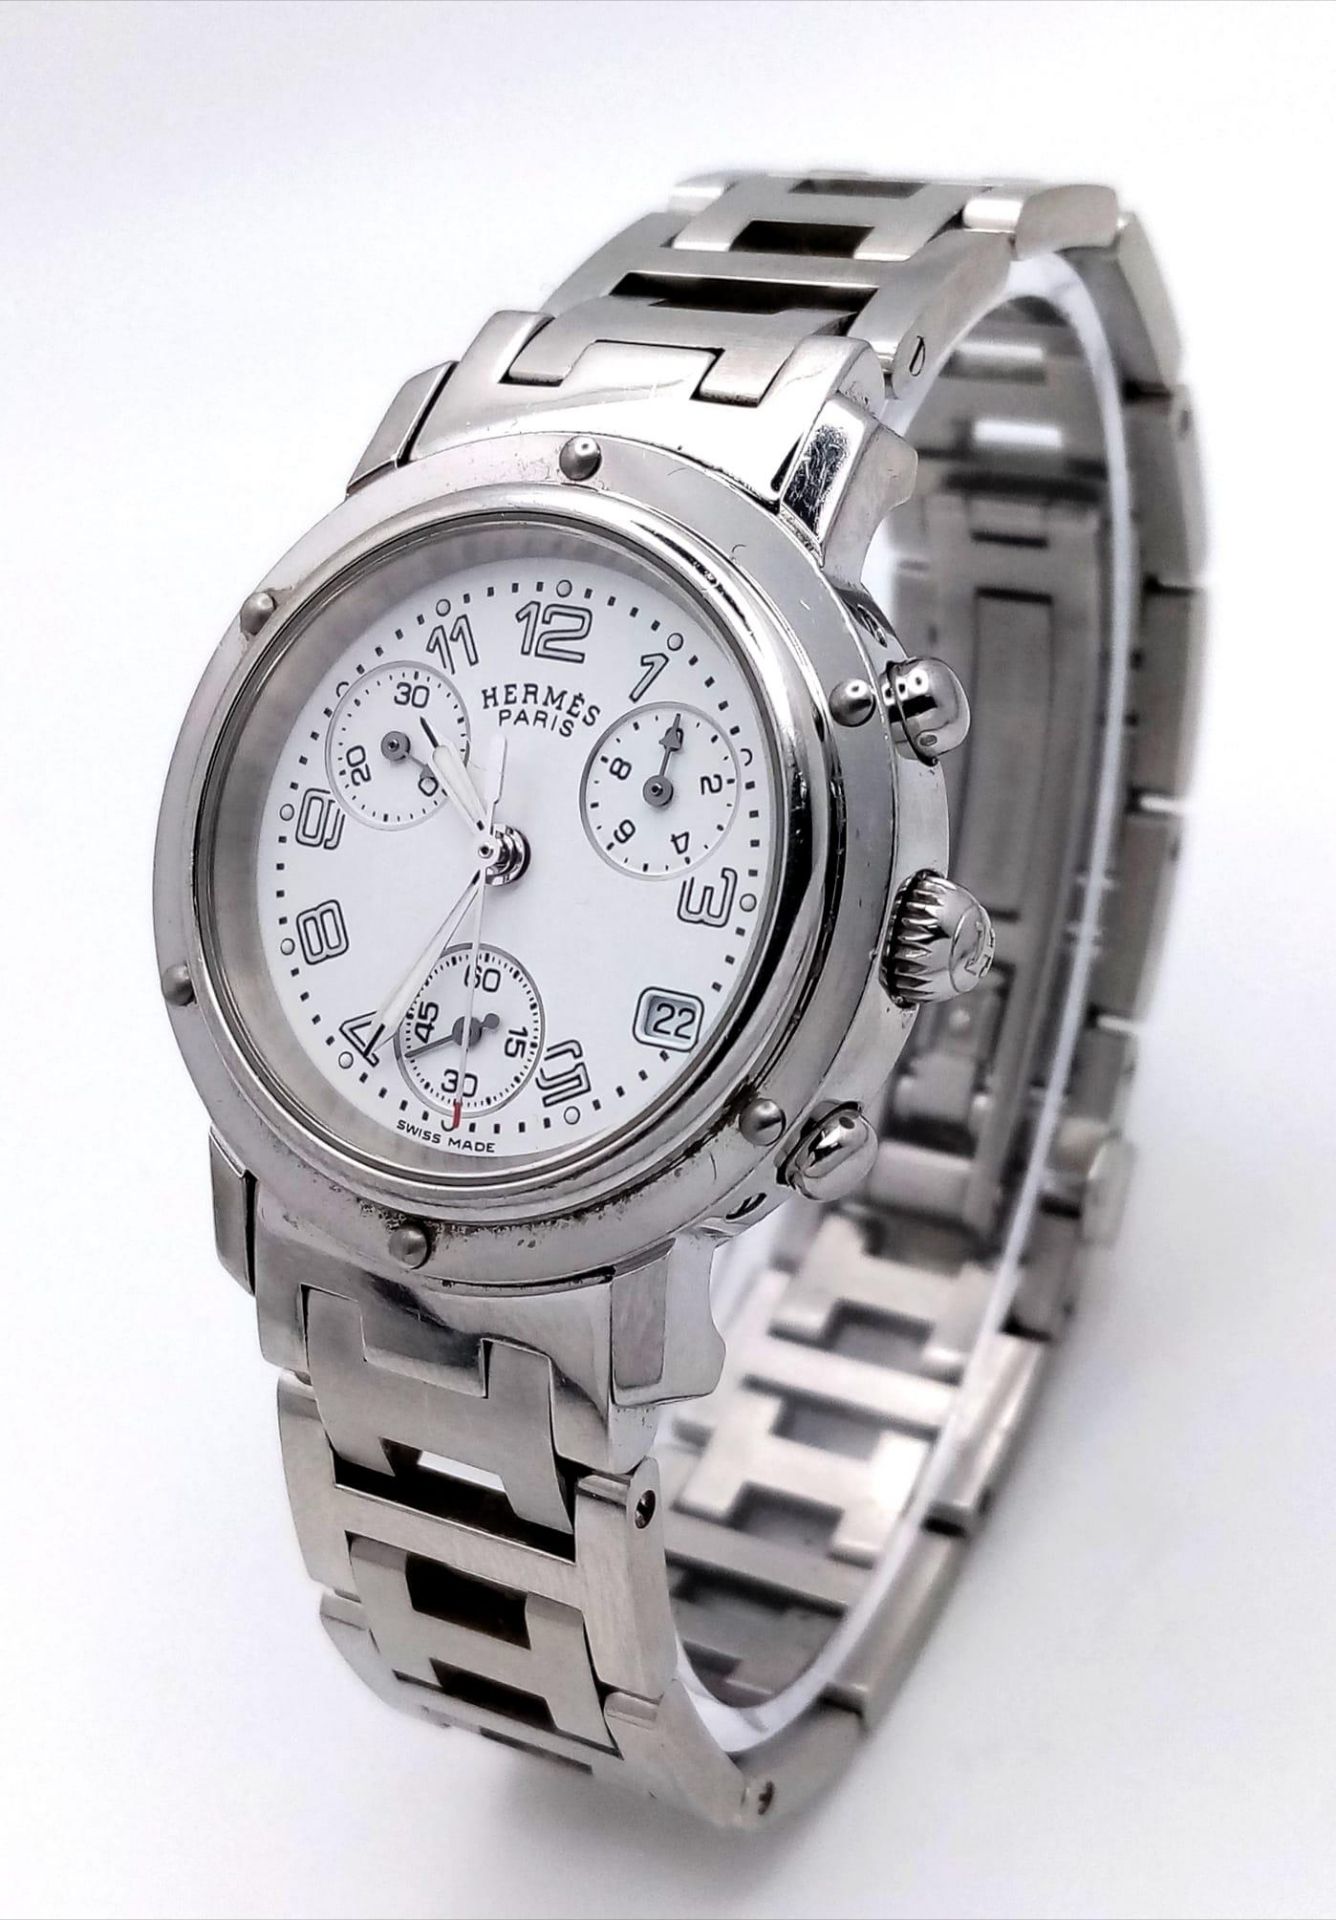 A "HERMES" OF PARIS STAINLESS STEEL CHRONOGRAPH LADIES WATCH WITH 3 SUBDIALS , DATE BOX AND WHITE